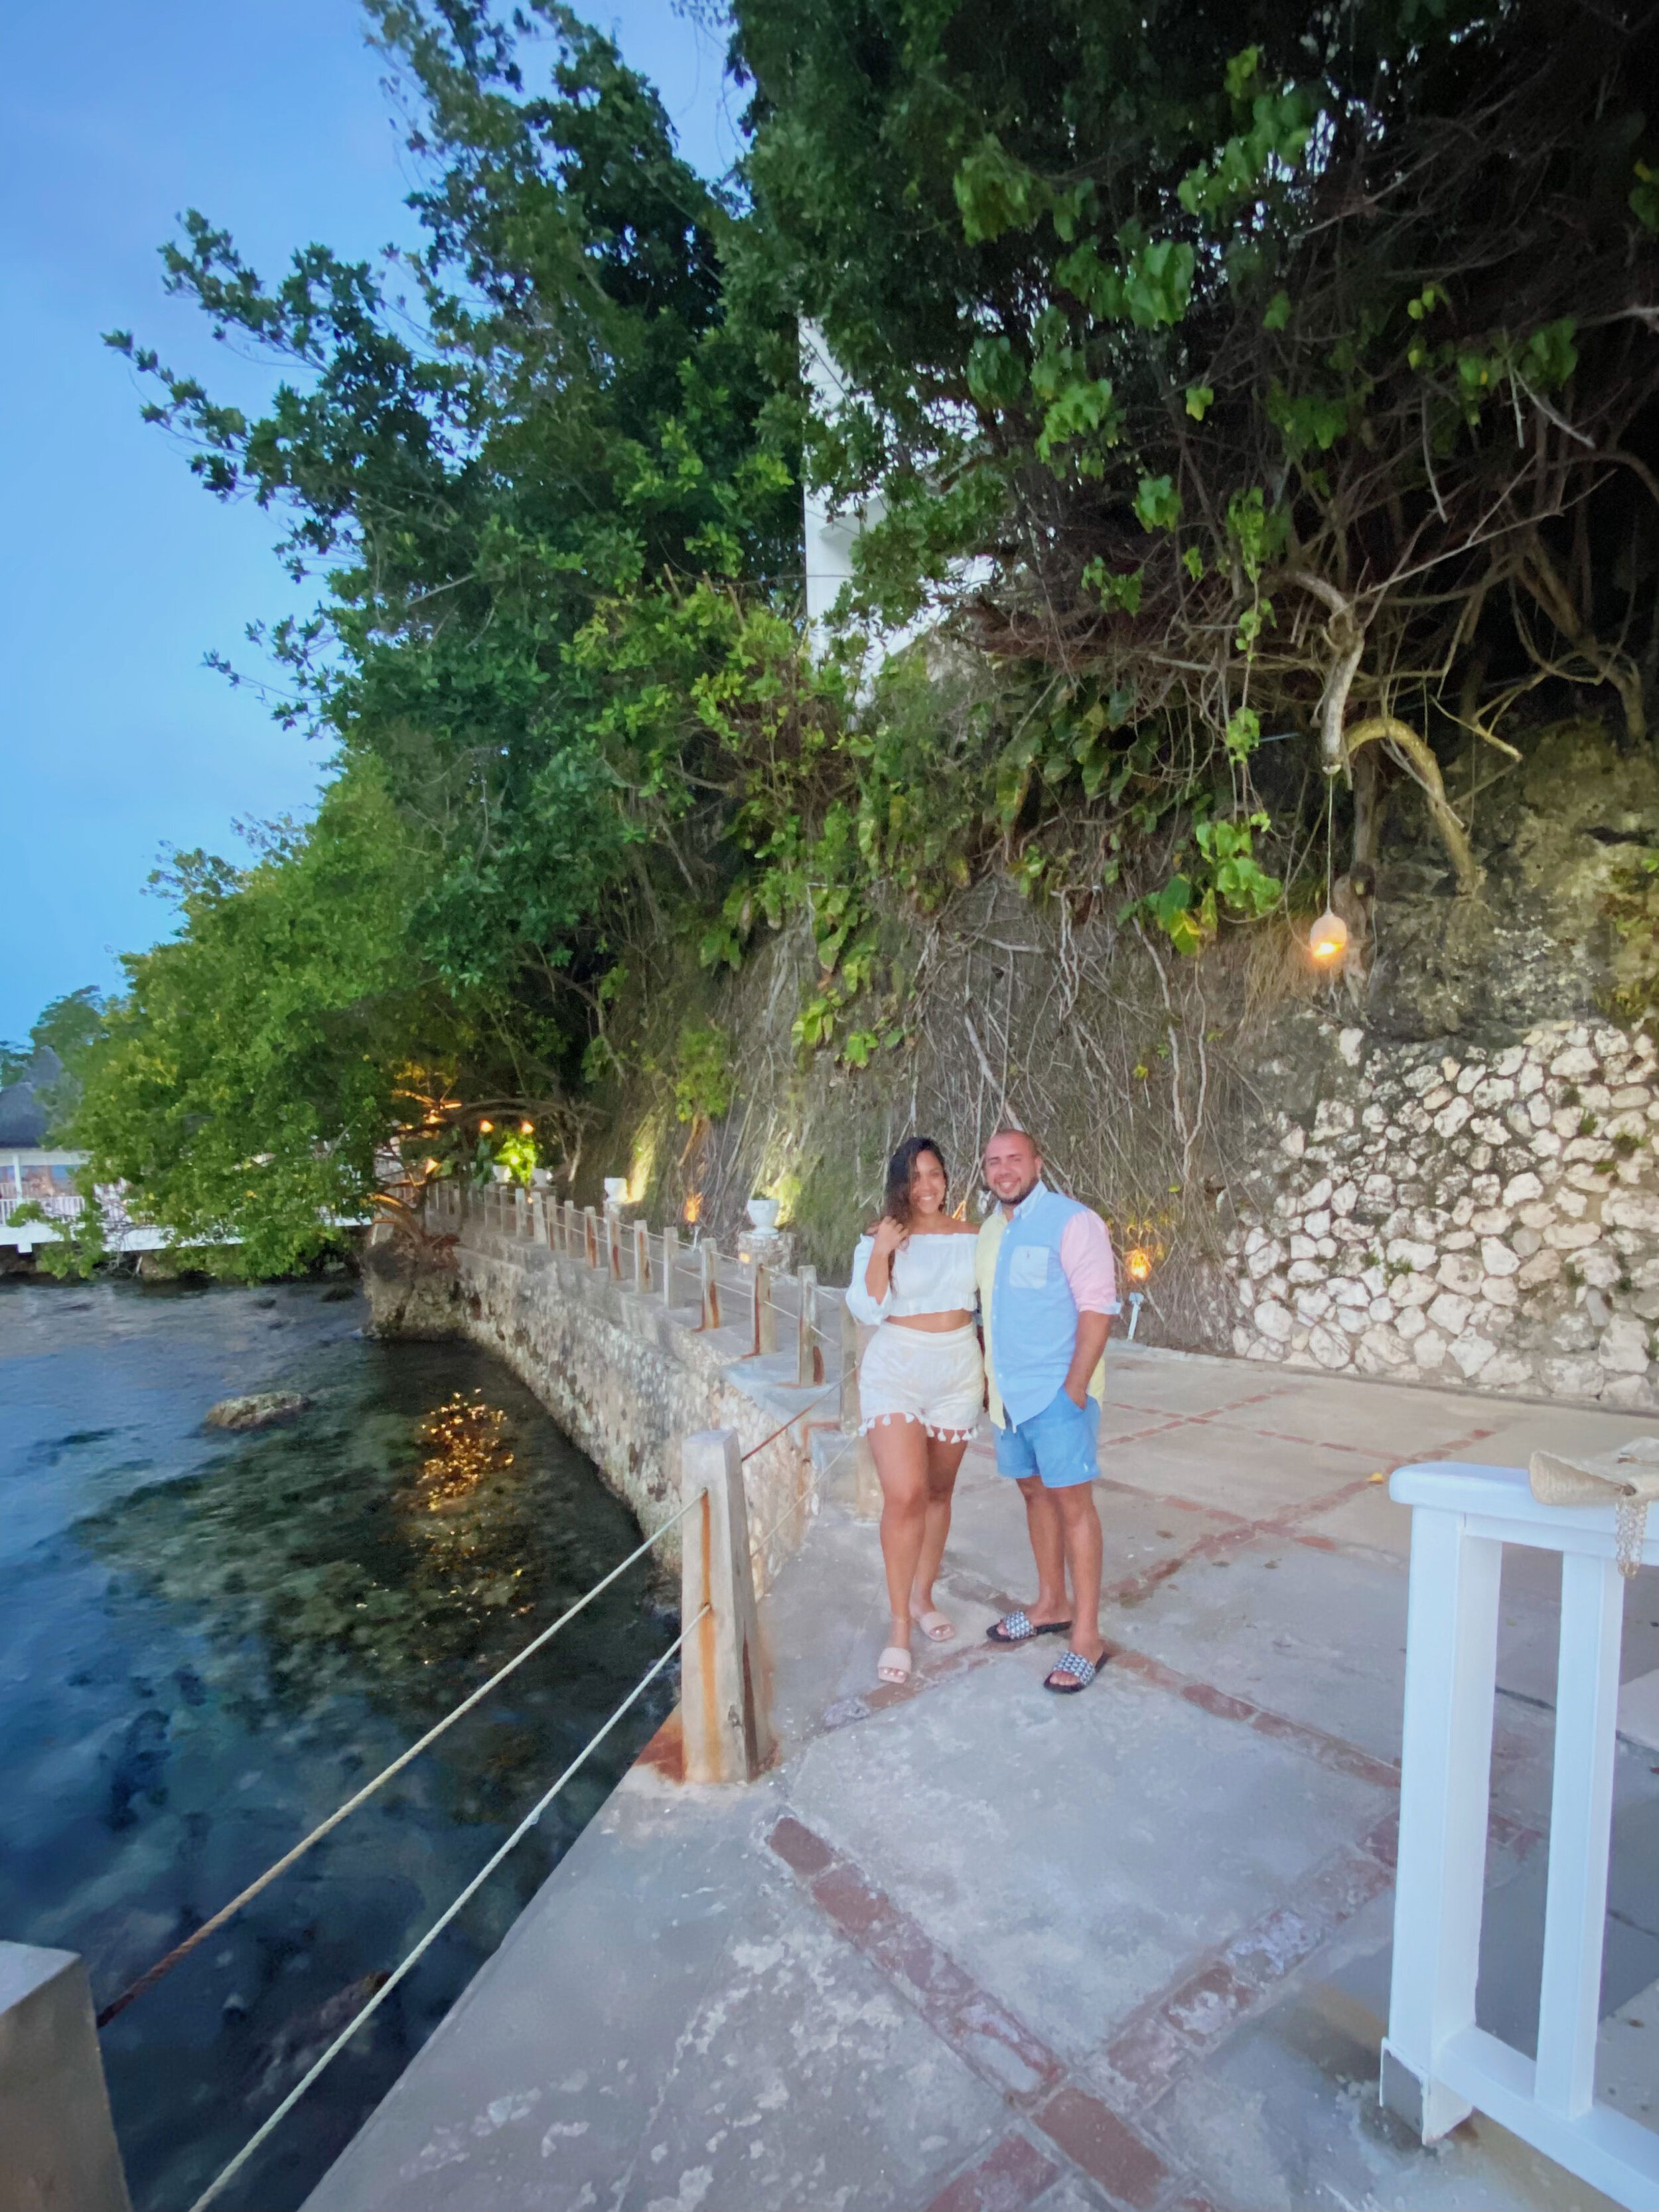 Couples Tower Isle Getaway In Jamaica — Ana Jacqueline image